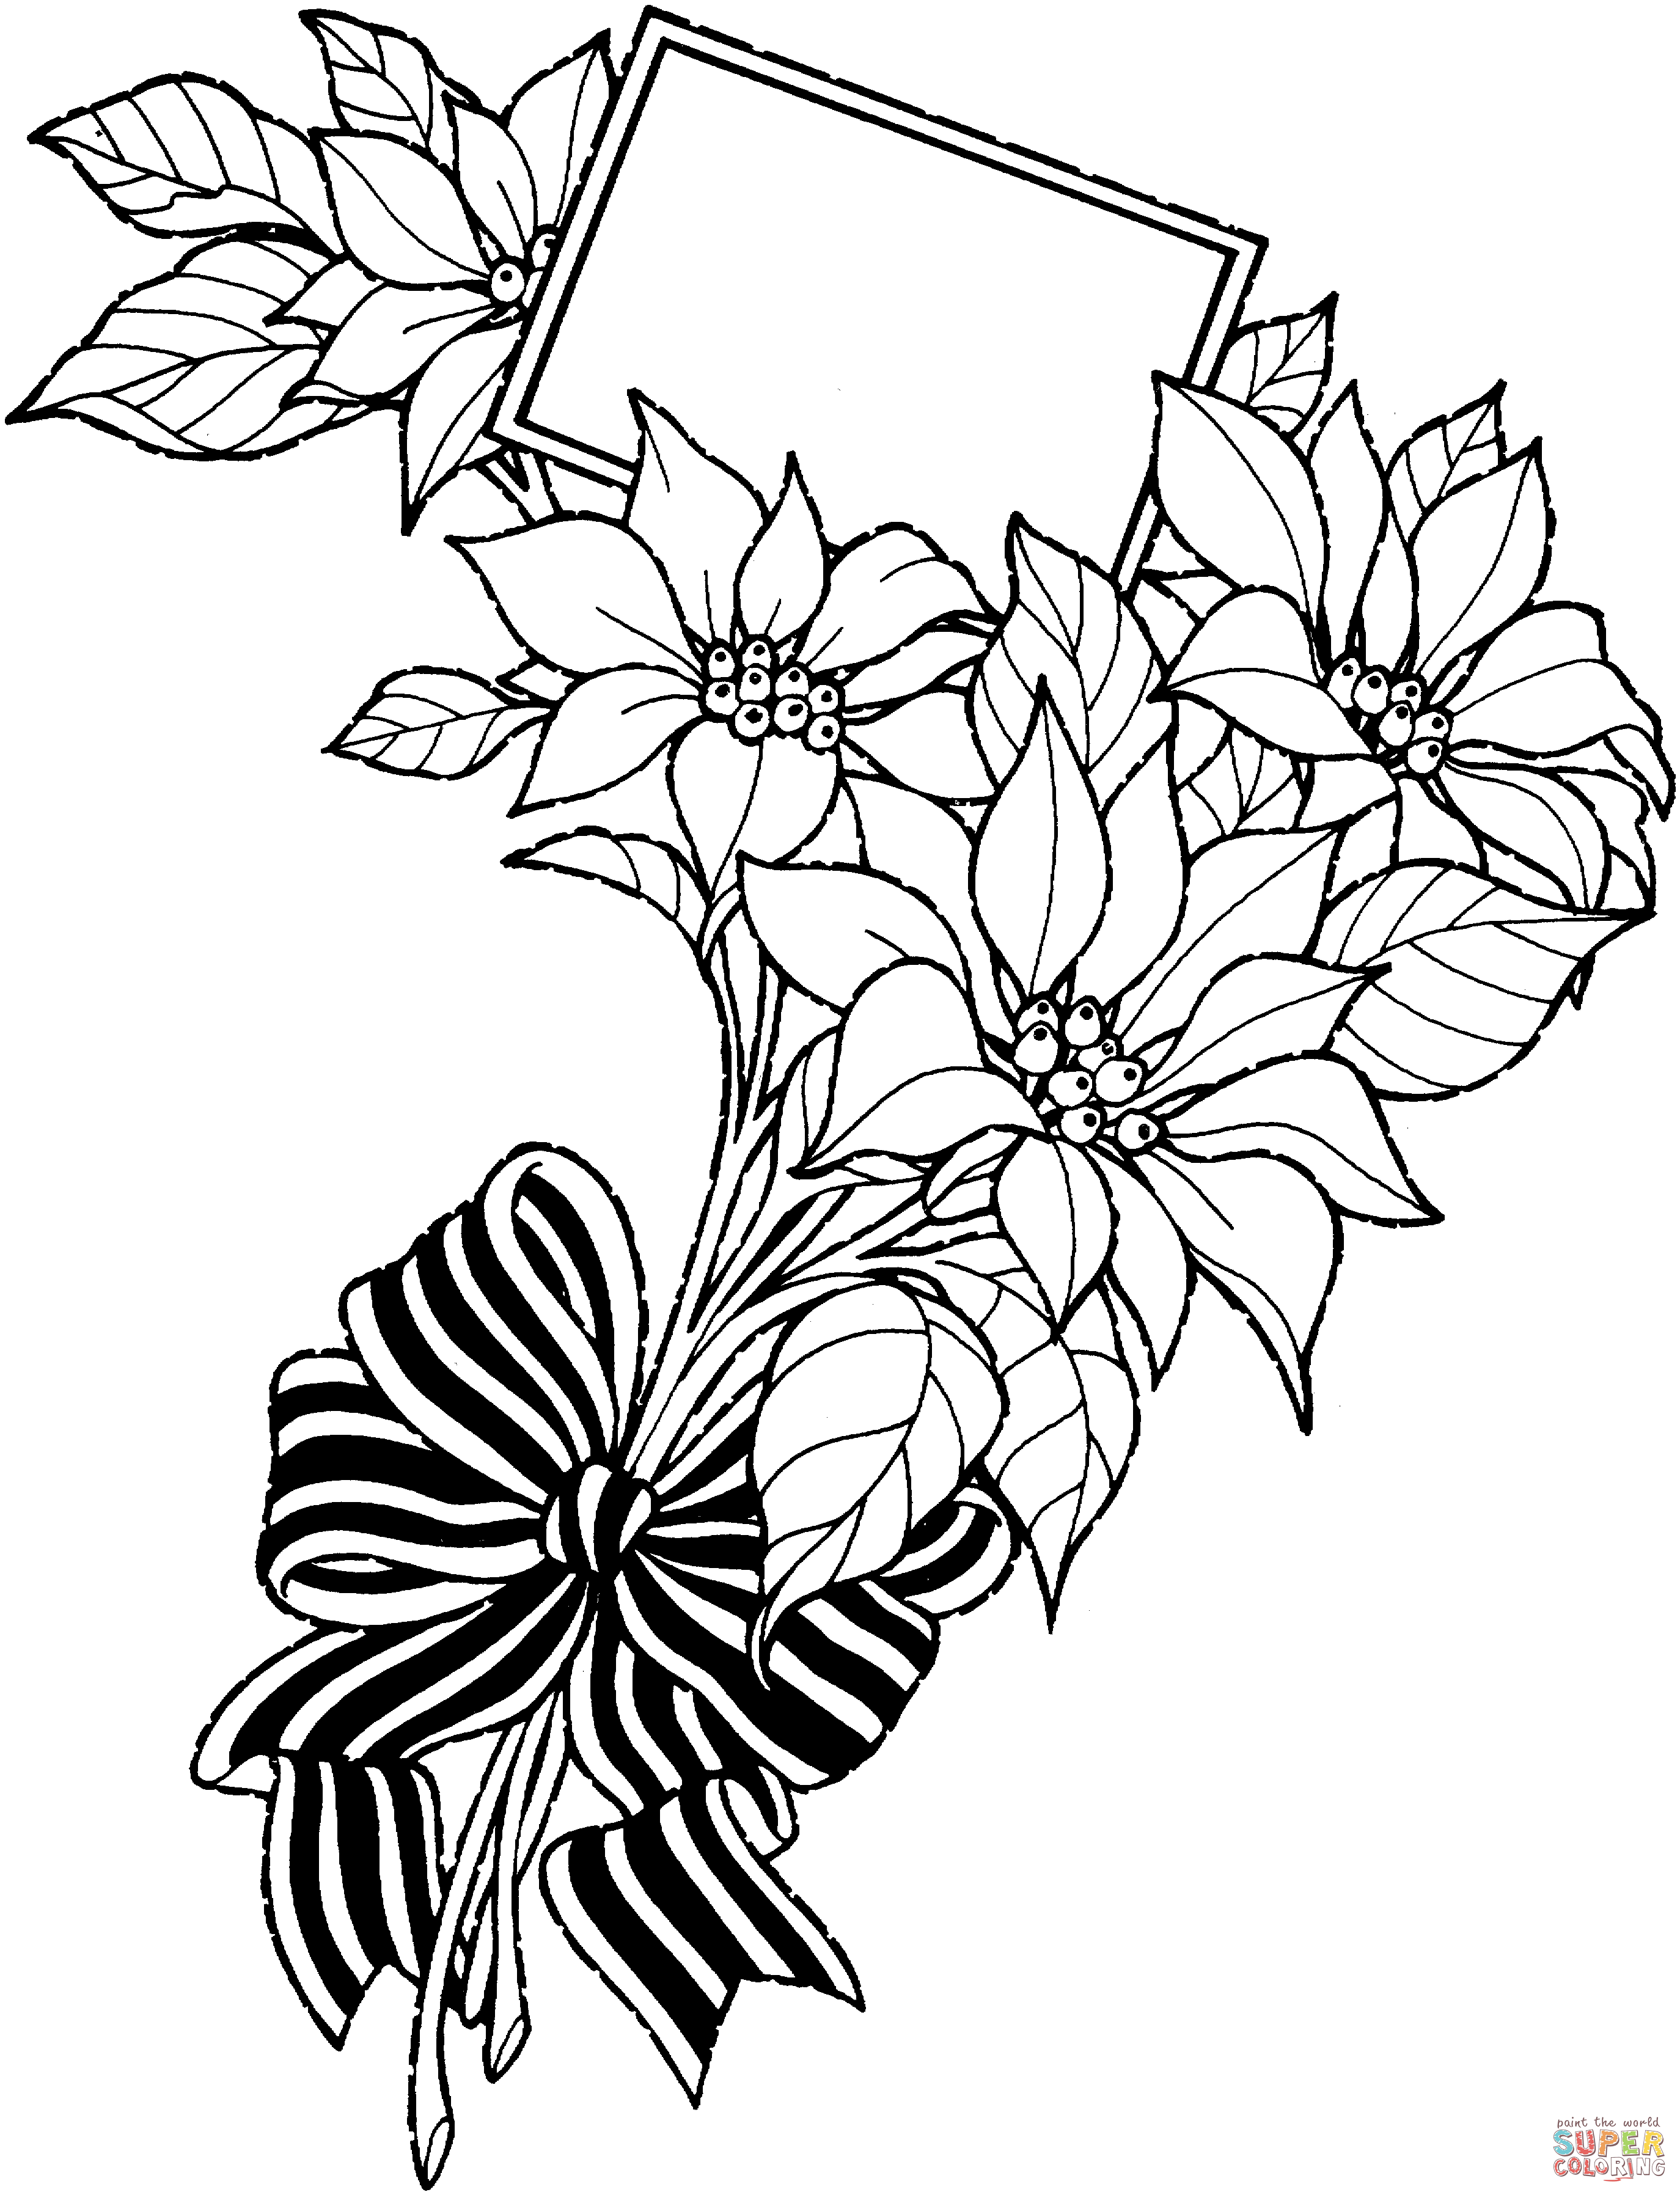 Christmas Flower Bouquet with Greeting Card Coloring Page